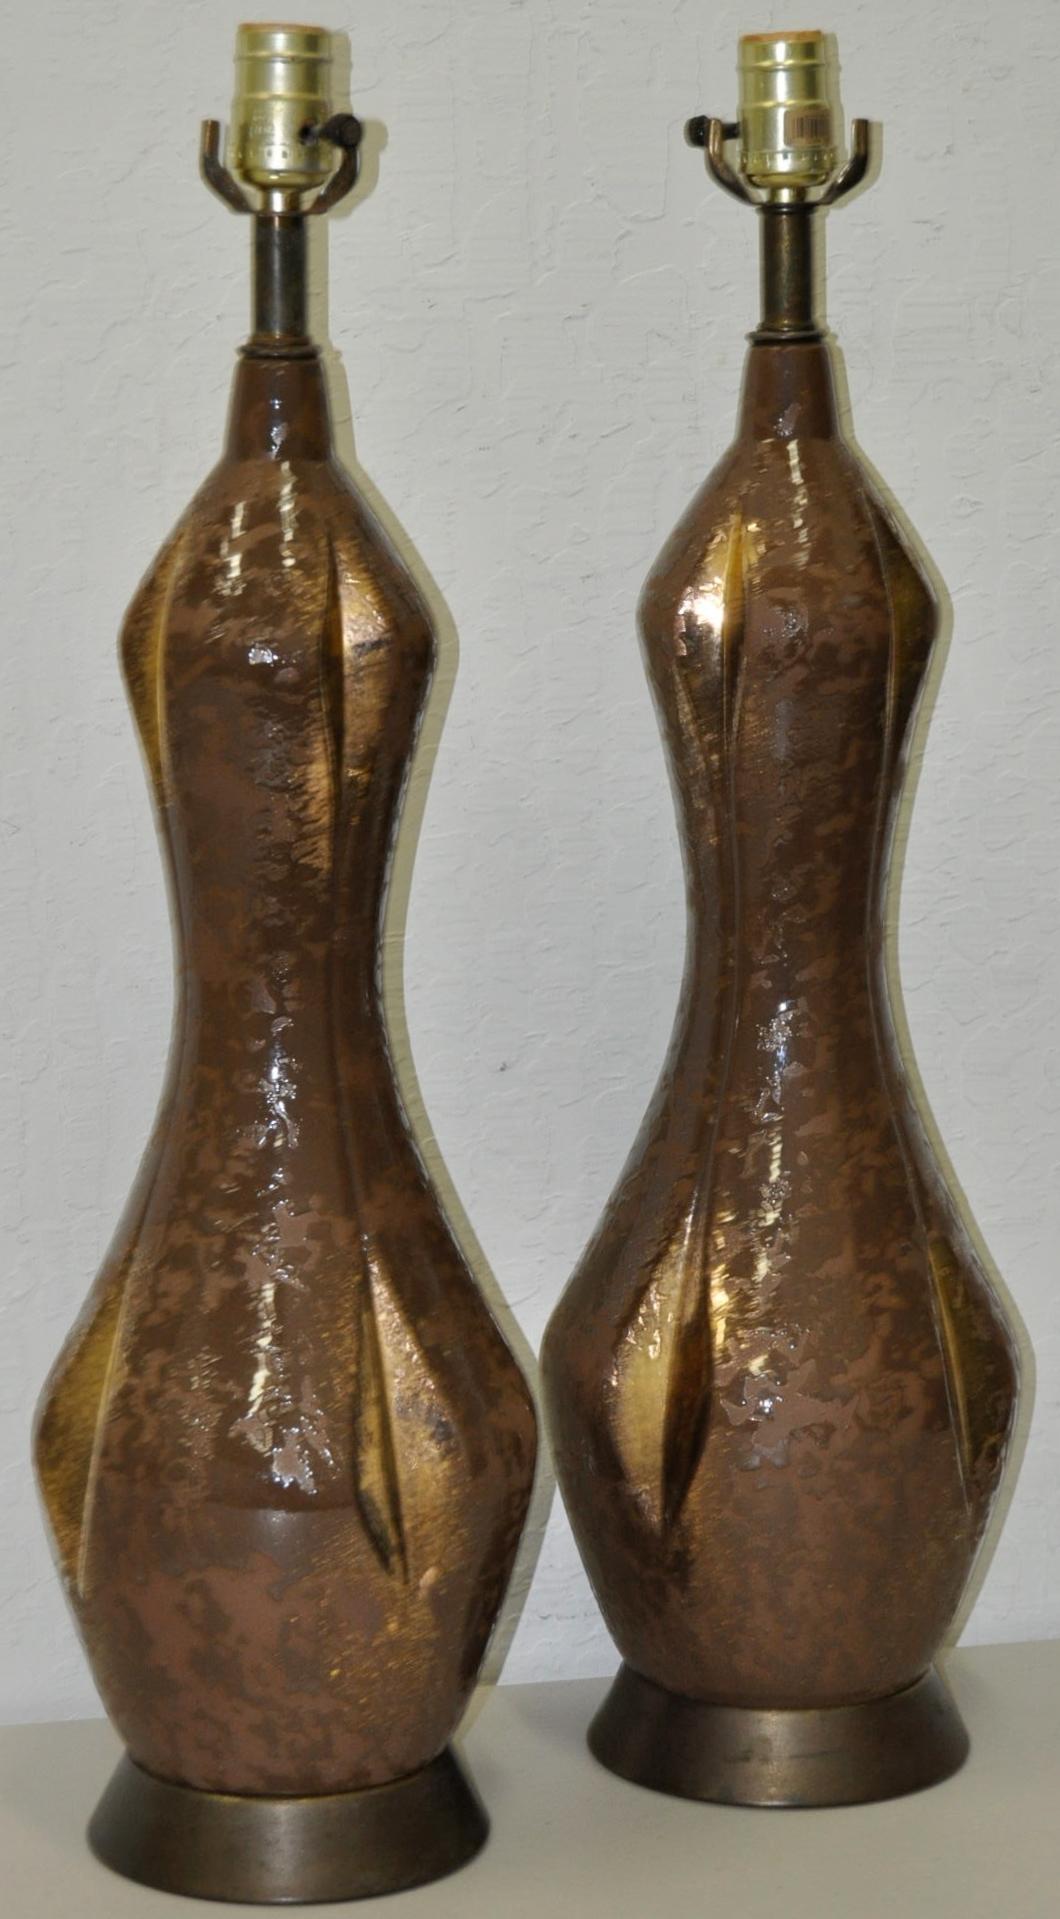 Impressive pair of midcentury gilded glaze ceramic table lamps circa 1950. 

Rich earth tones with subtle gilded underglaze. 

These tall, graceful lamps are in excellent condition and will light up any room. 

Wired and ready to illuminate.